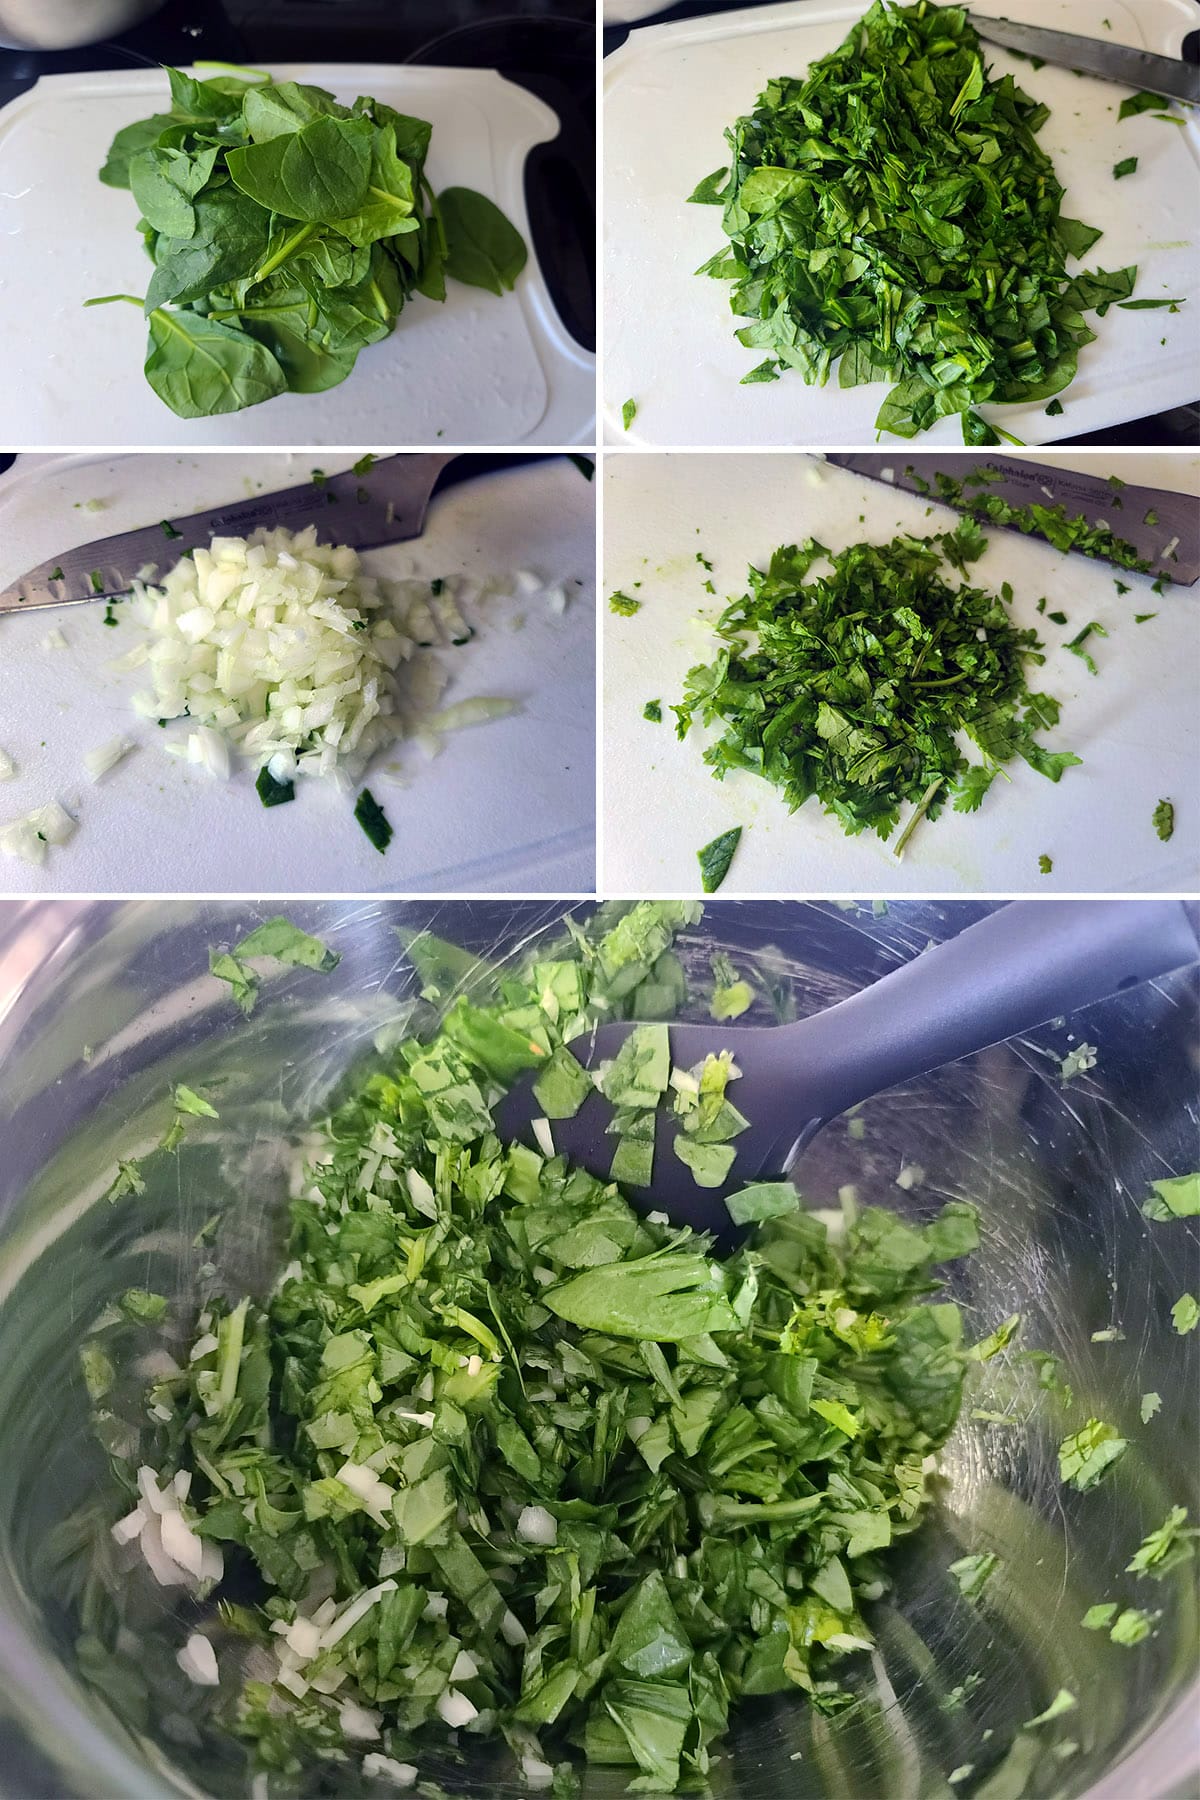 A 5 part image showing the spinach and onions being chopped and mixed.